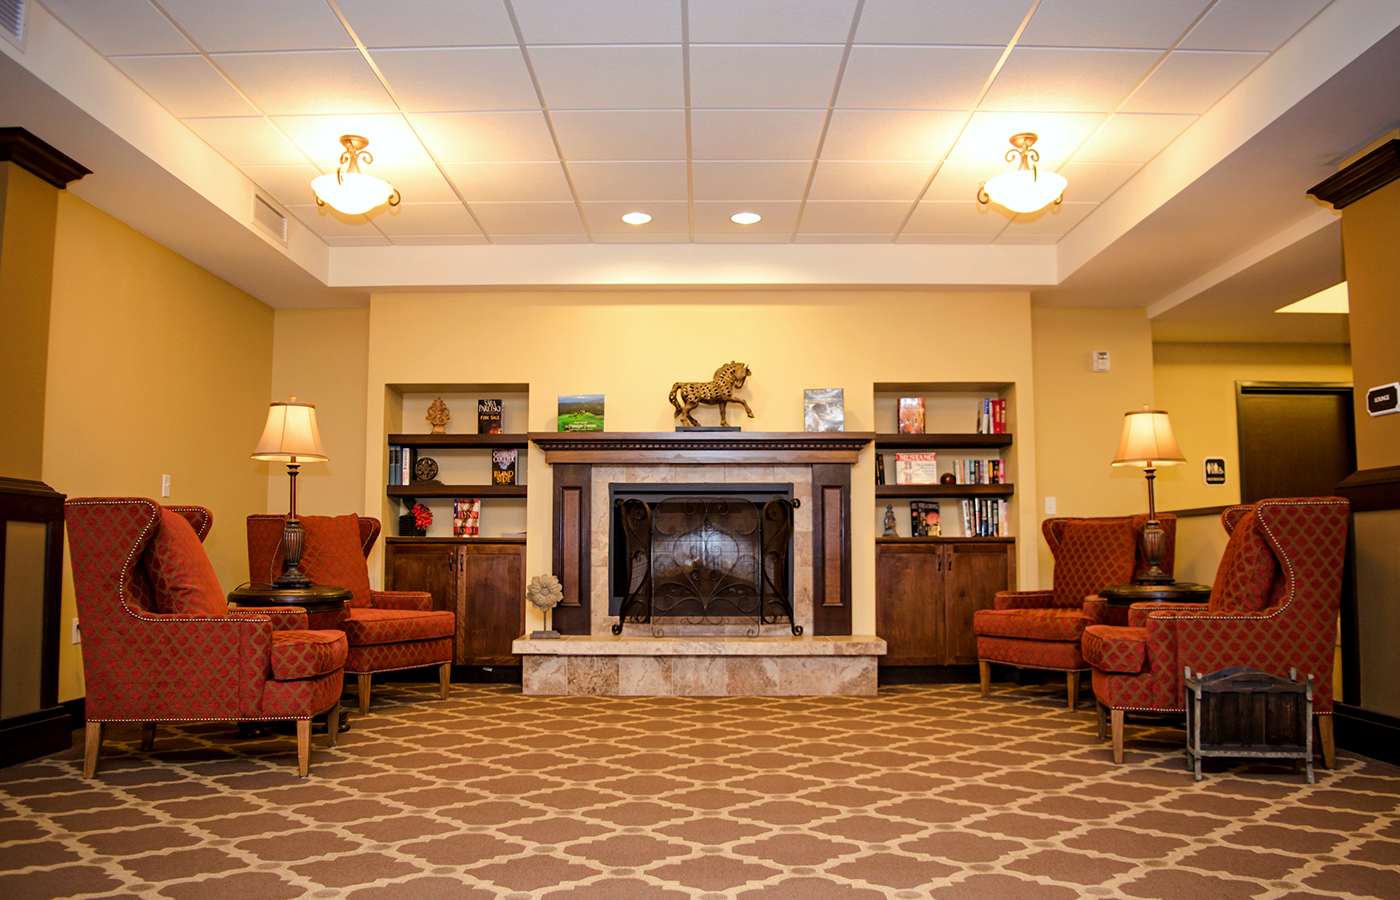 A room in the library with a fireplace and seating.